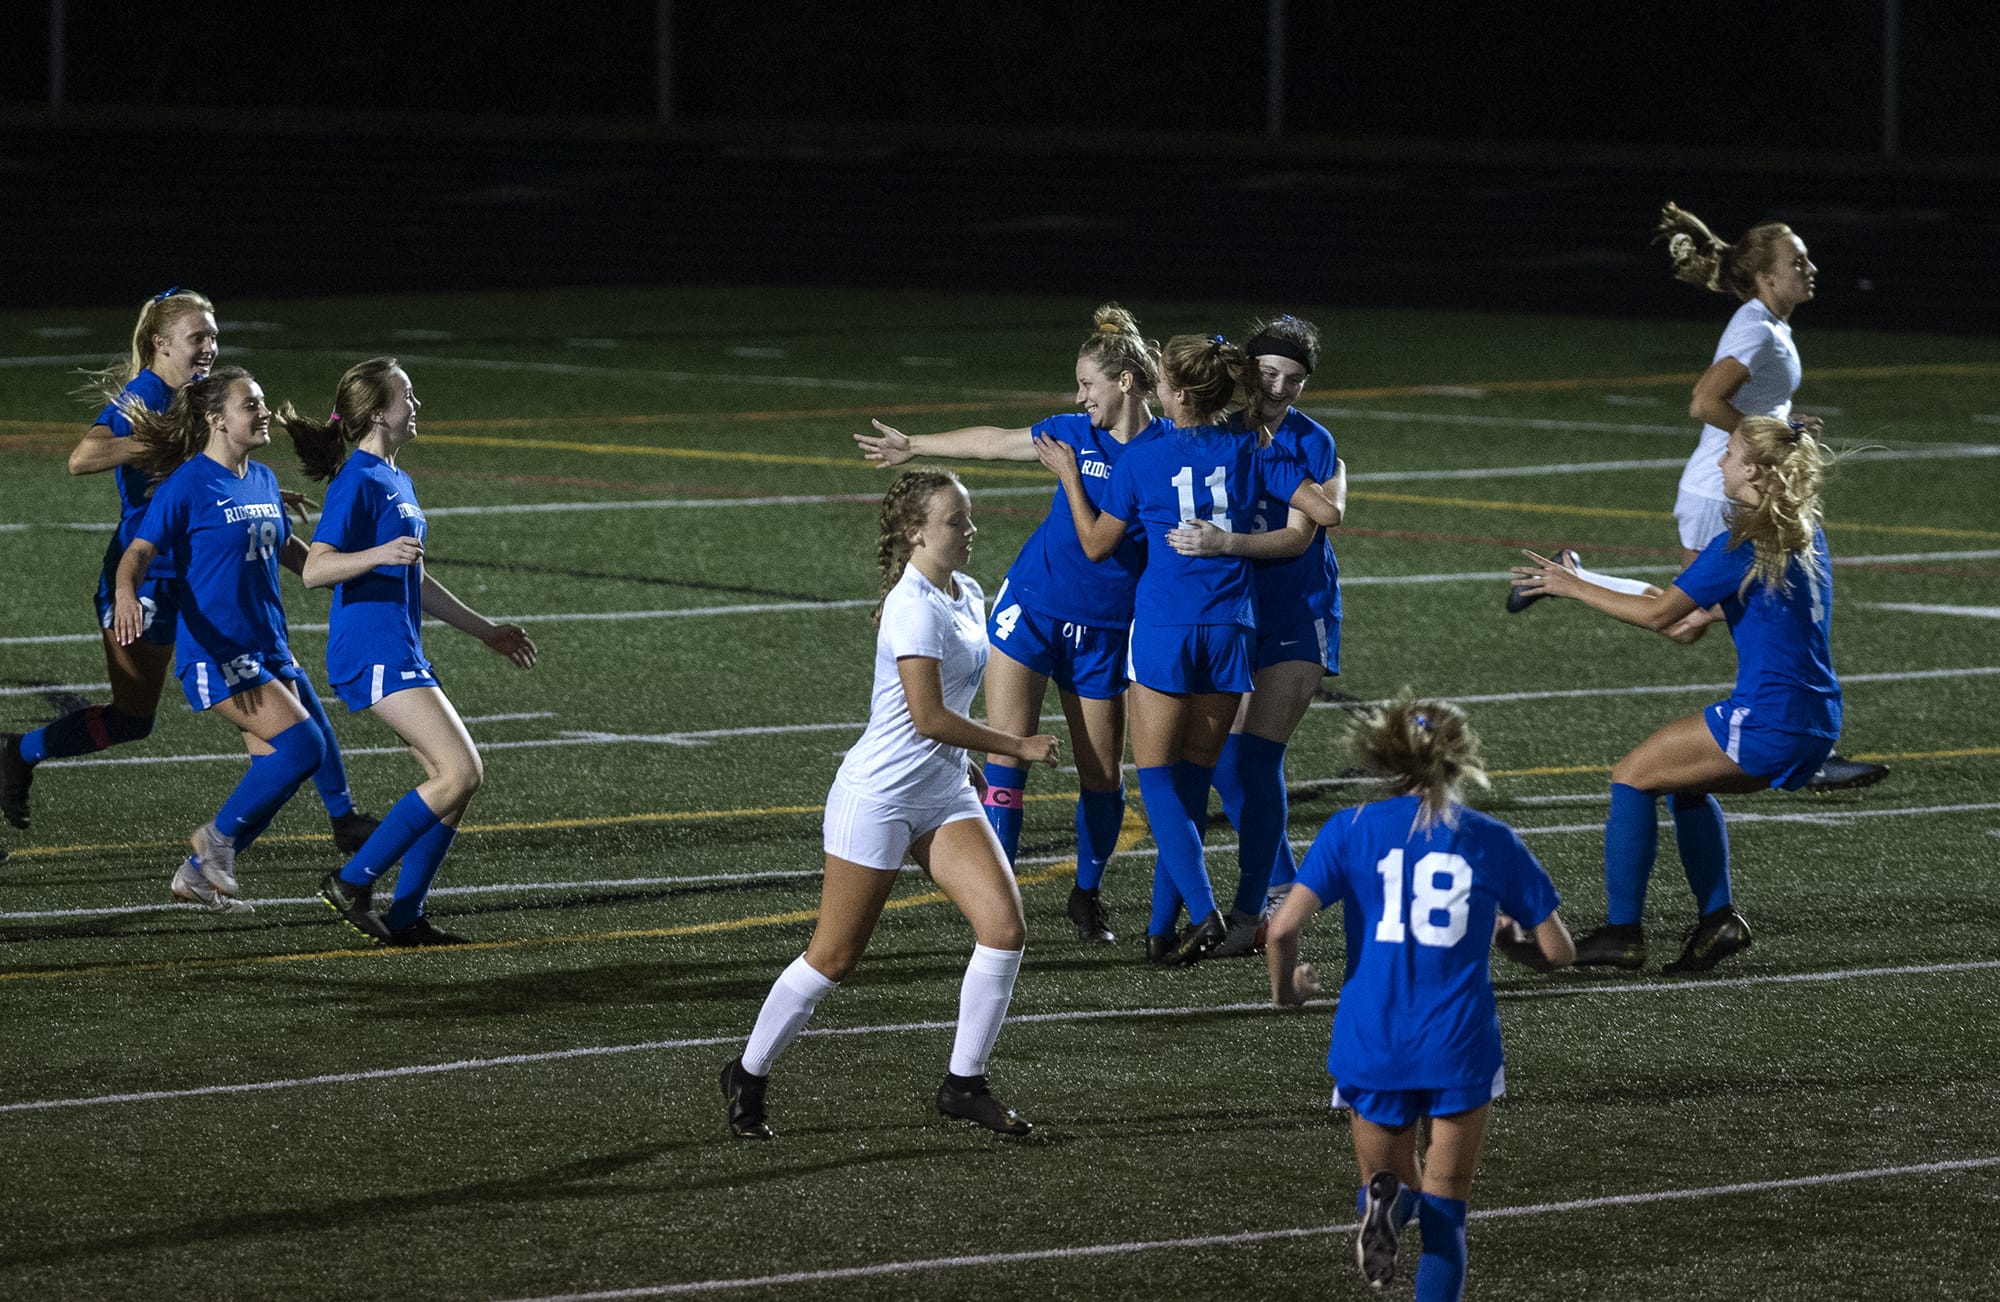 RidgefieldÕs Brooke Weese (4) center, celebrates a goal with her teams during Tuesday nightÕs game in Ridgefield on Sept. 24, 2019. Ridgefield won 4-0.